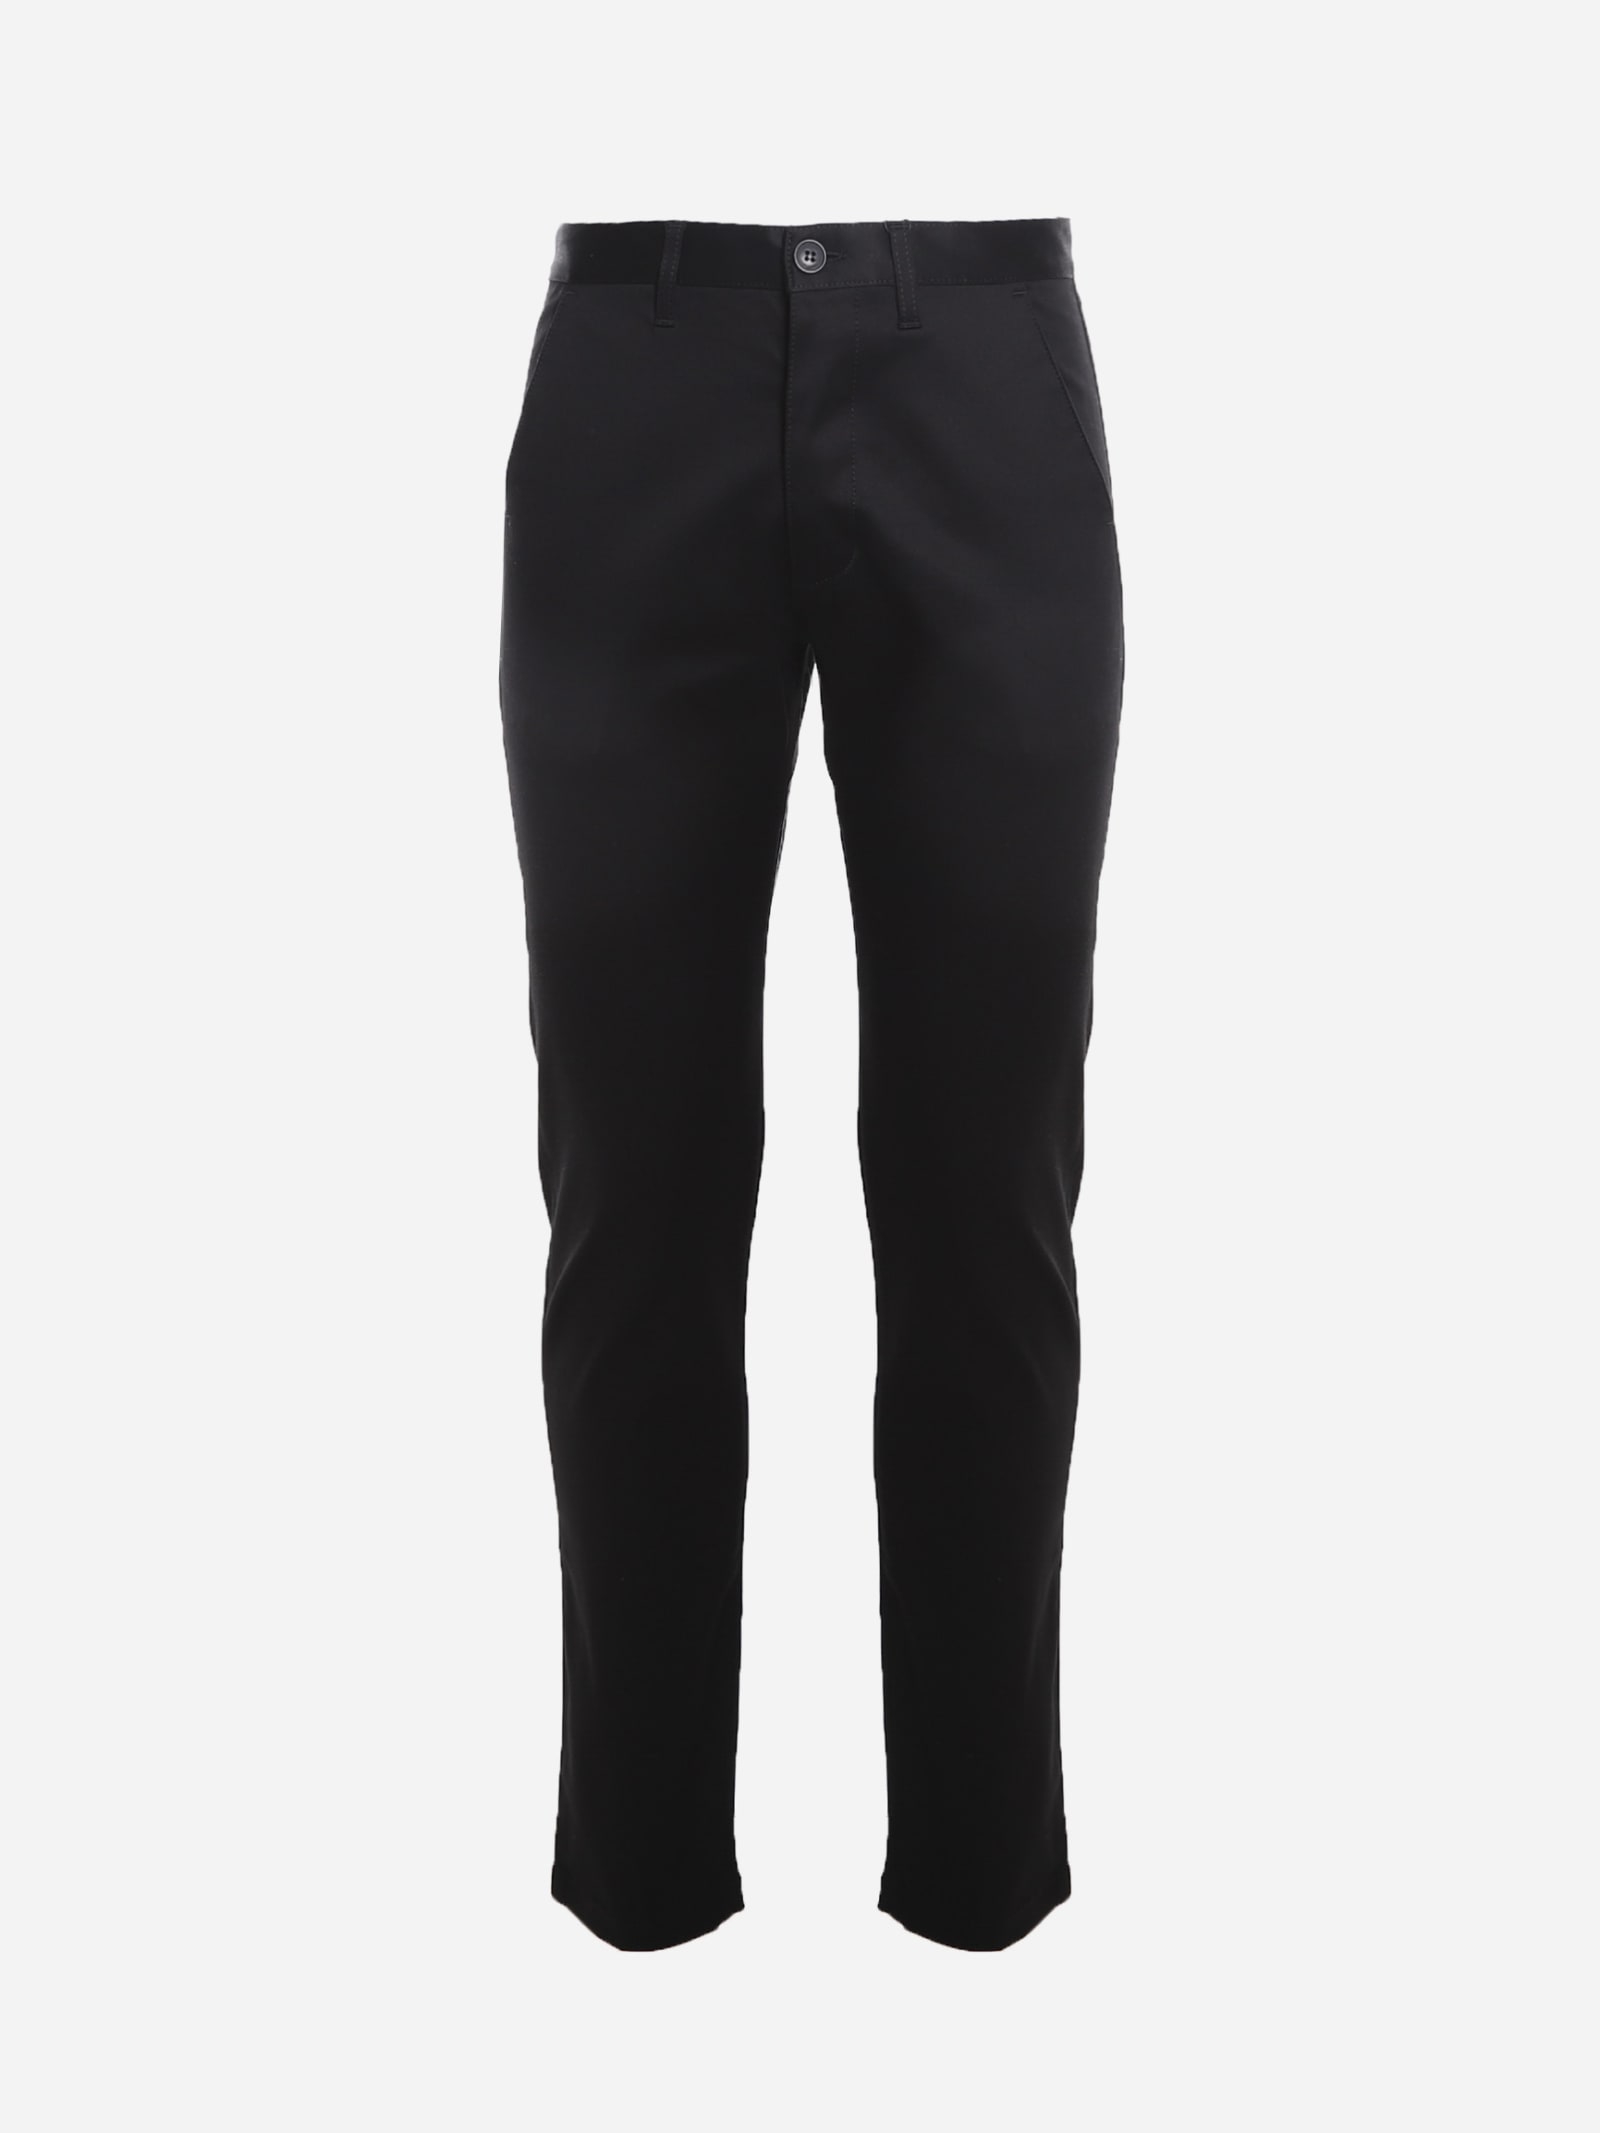 SAINT LAURENT CHINO PANTS MADE OF STRETCH COTTON,582300 Y812K1000